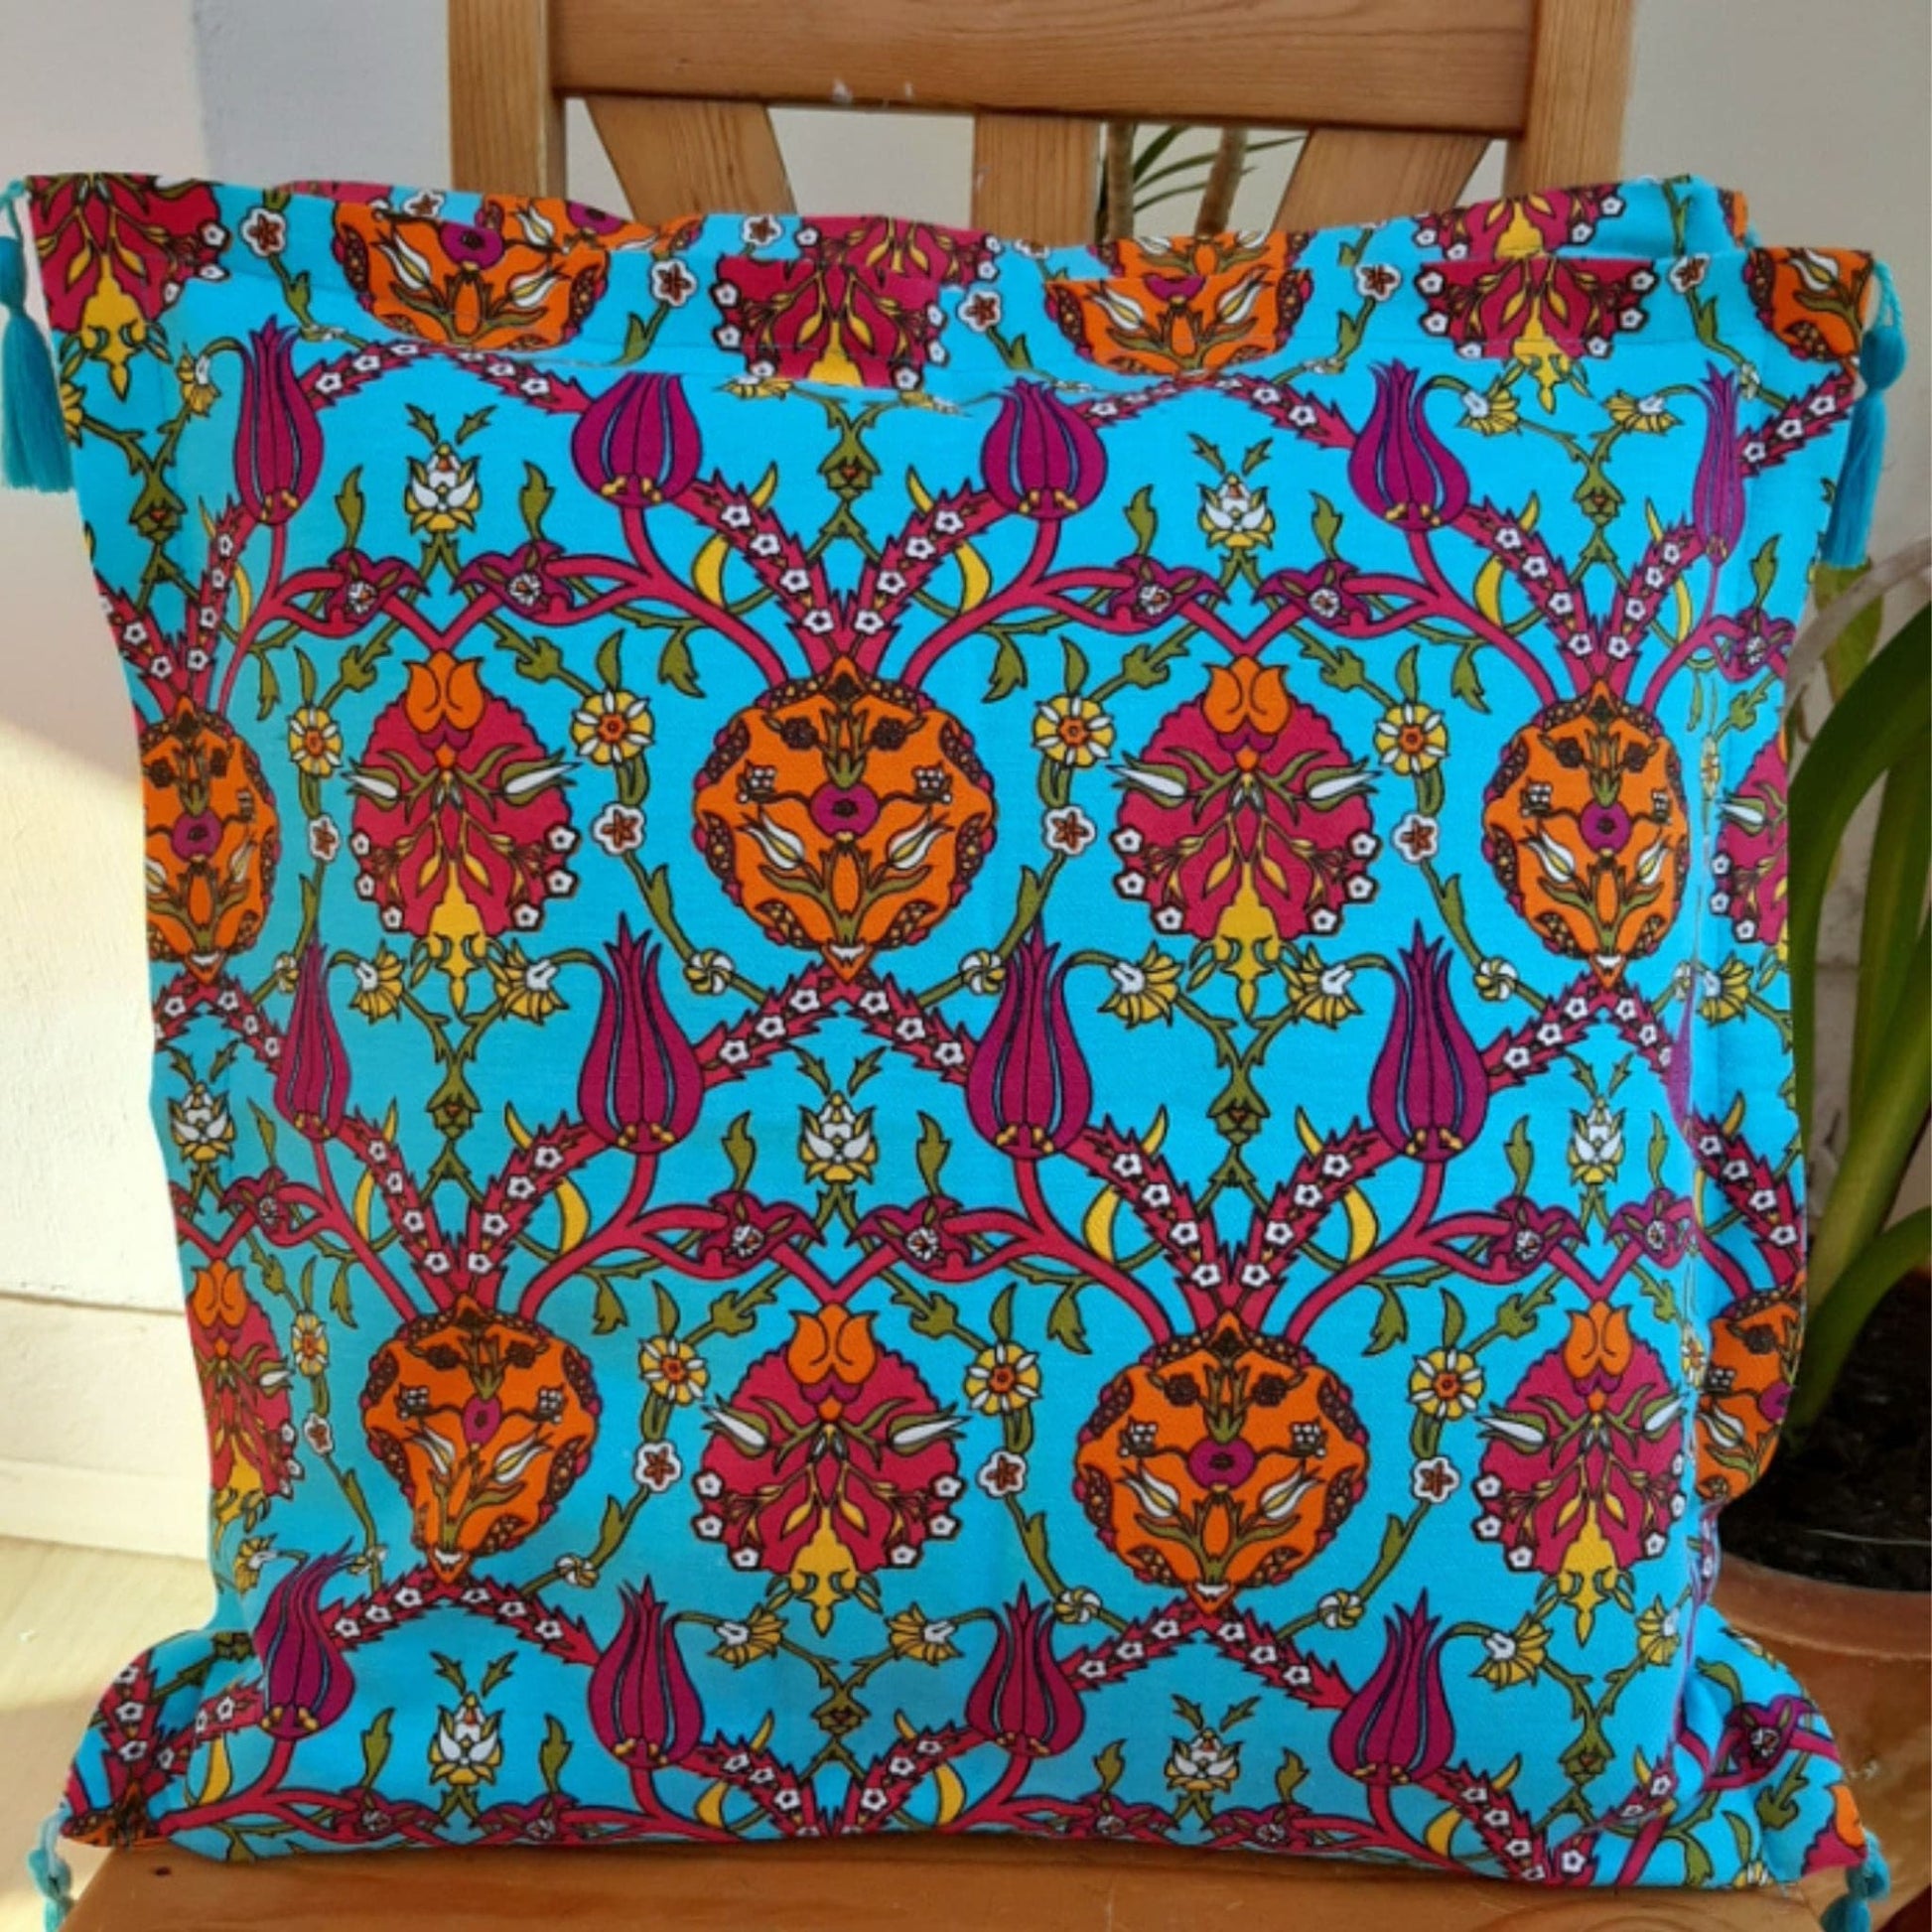 Turkish cotton cushion cover sets, turquoise colour, tile inspired floral motifs